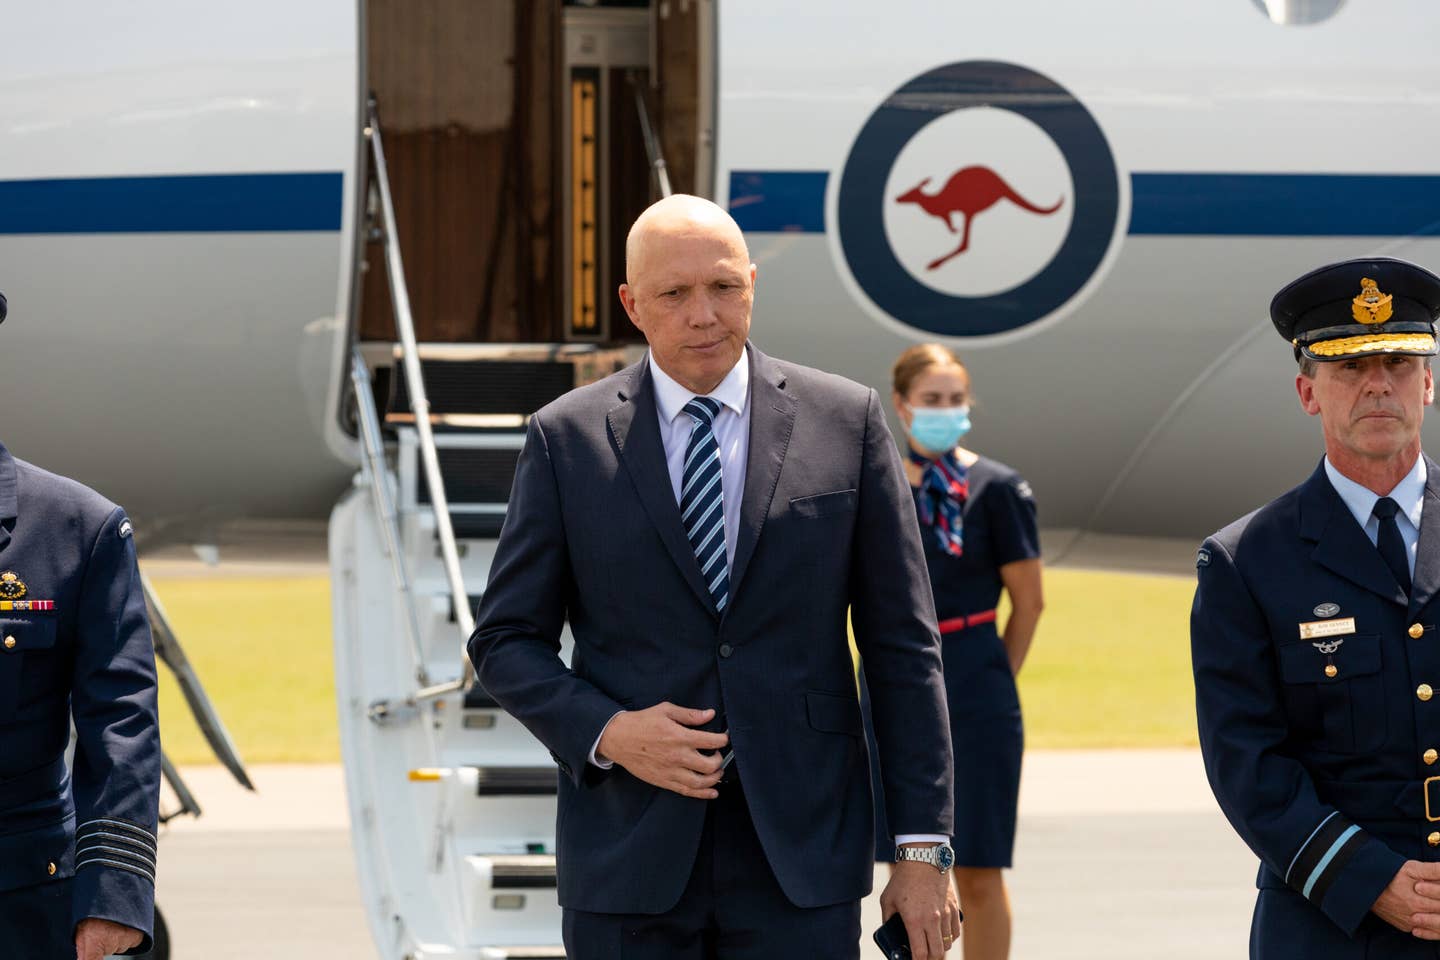 Minister of Defense, Peter Dutton, MP, arrives at RAAF Base Williamtown, near Newcastle in New South Wales in February this year. <em>Australian Department of Defense</em>